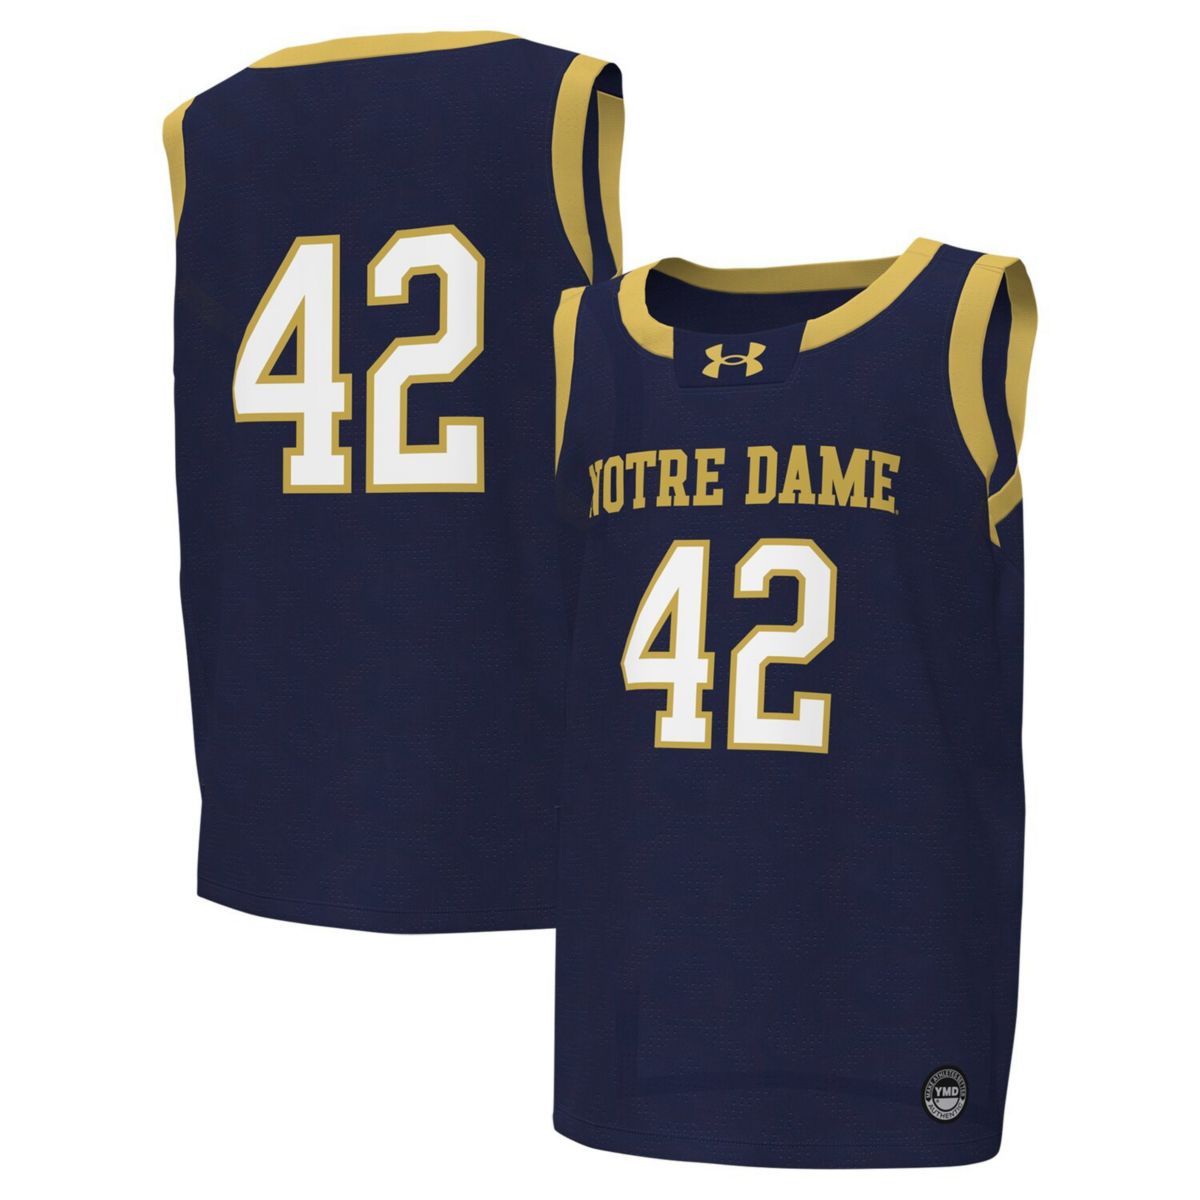 Youth Under Armour #42 Navy Notre Dame Fighting Irish Replica Basketball Jersey Under Armour